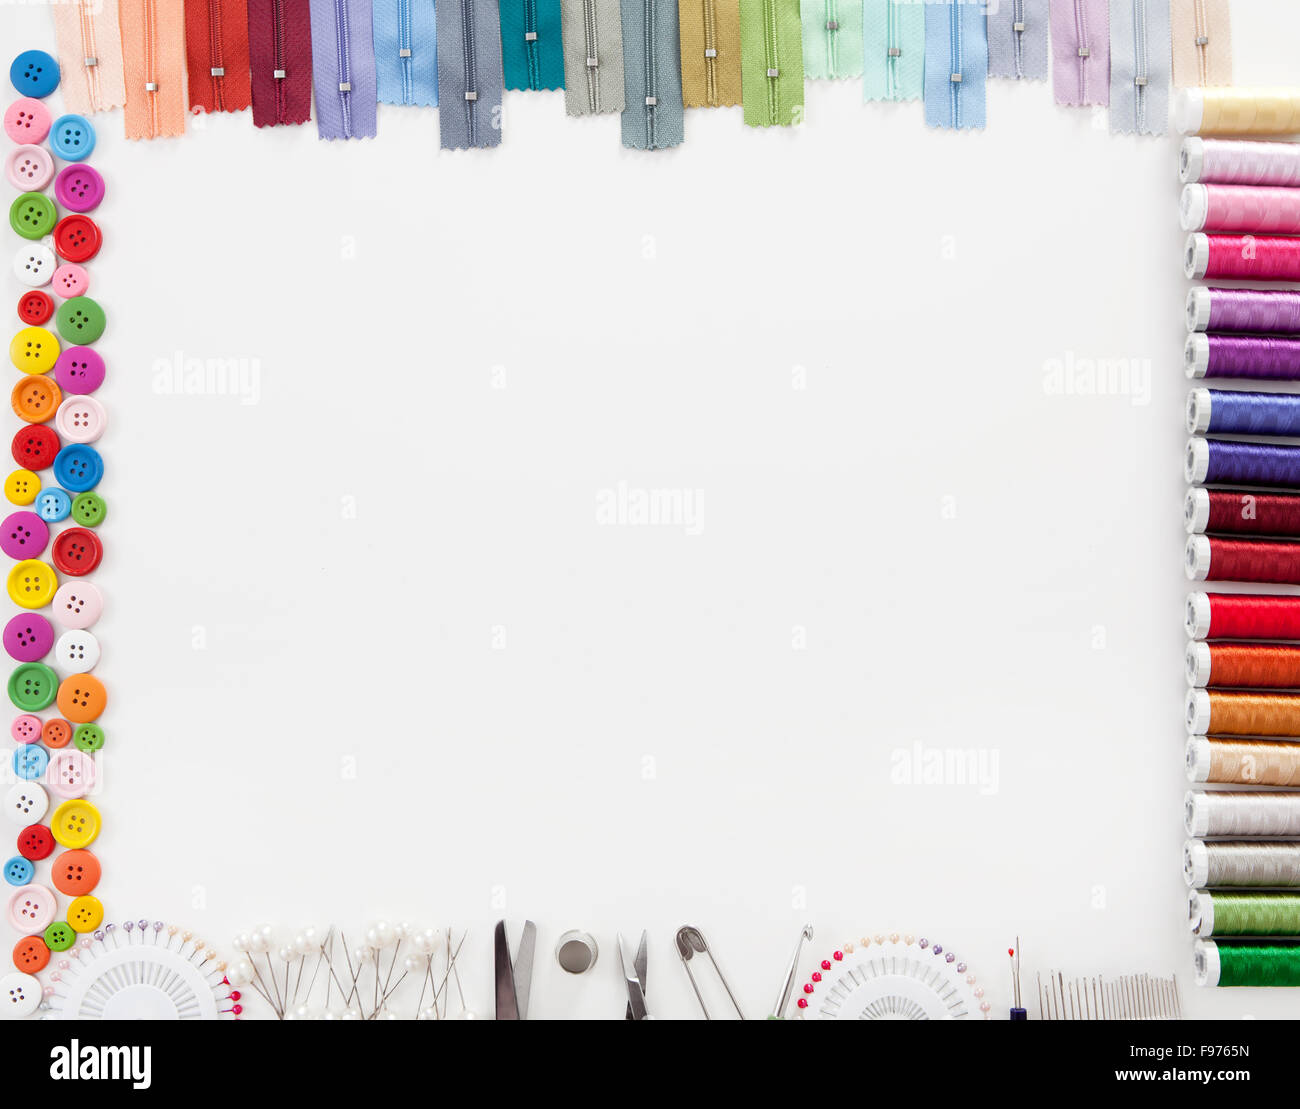 Different colorful accessories to tailor with white space for text in the middle Stock Photo